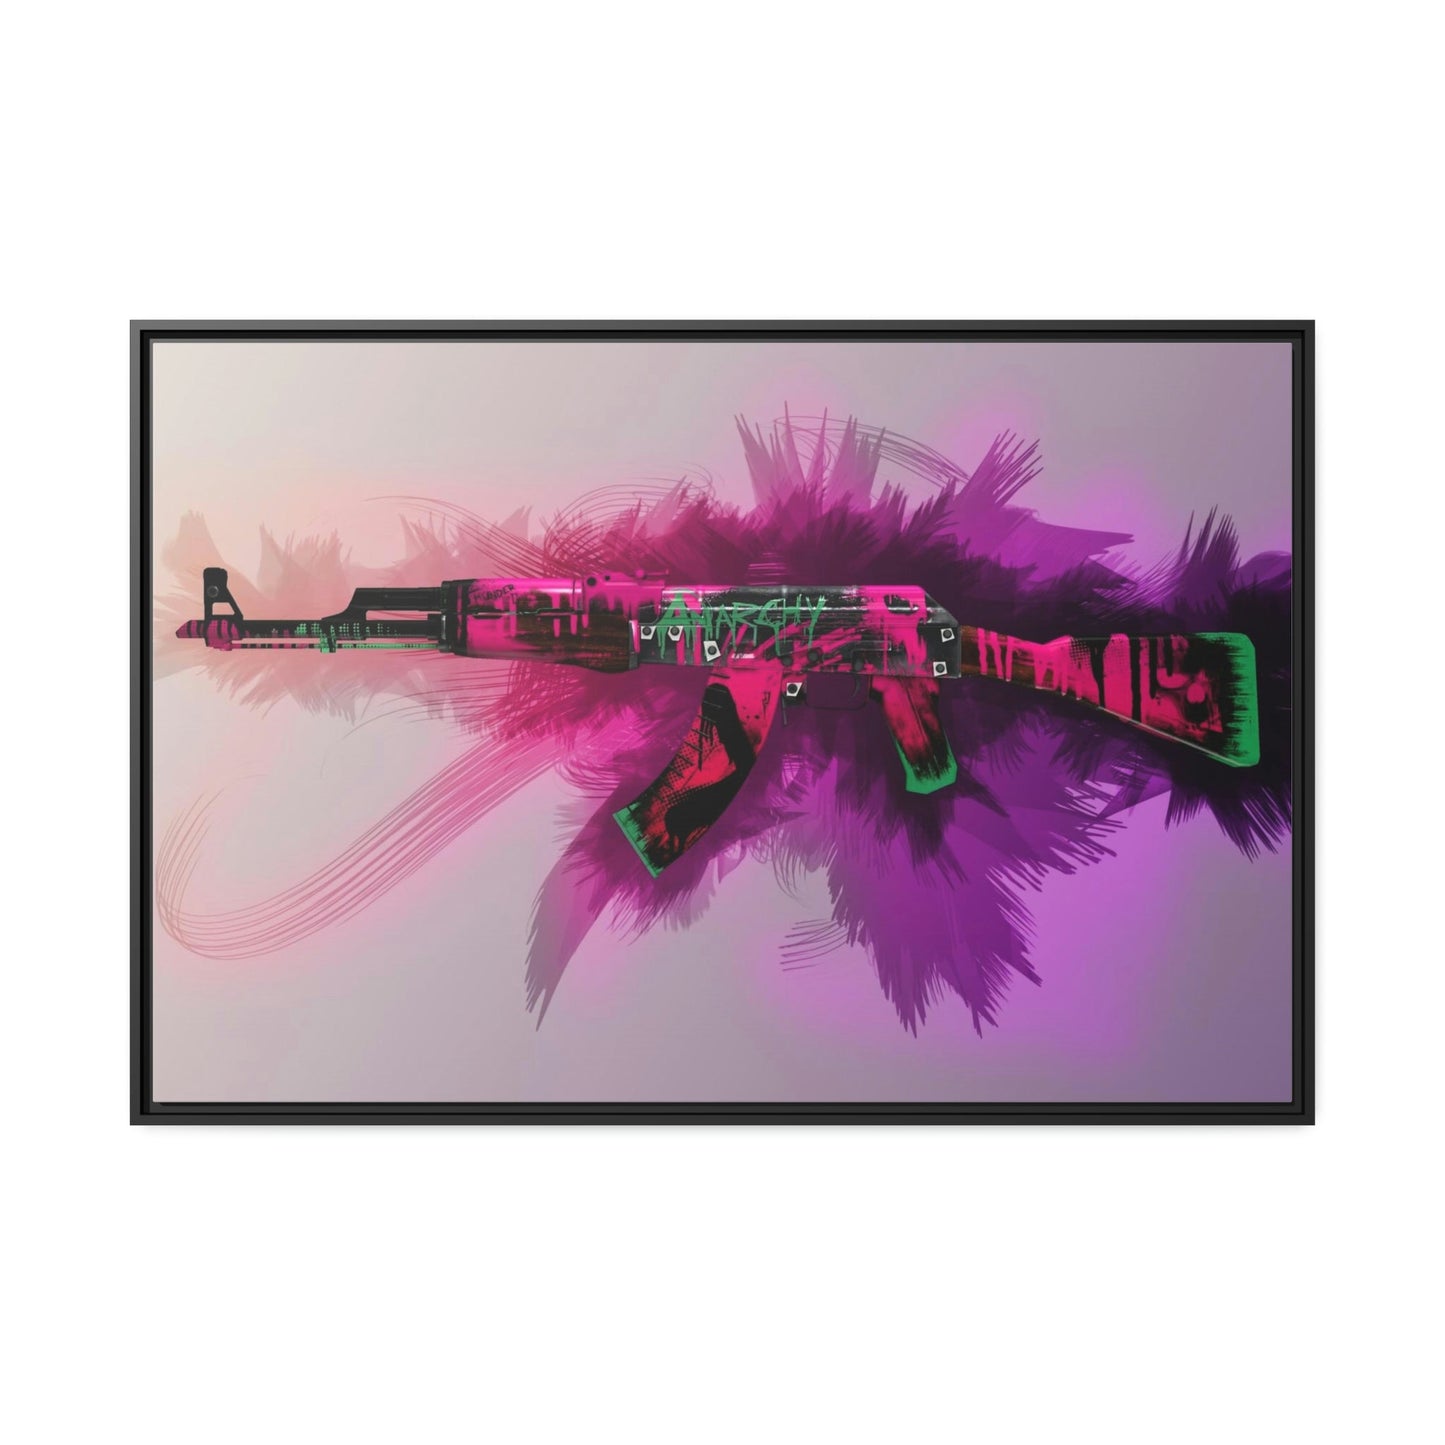 Counter Strike Chronicles: Wall Art on Framed Poster & Canvas